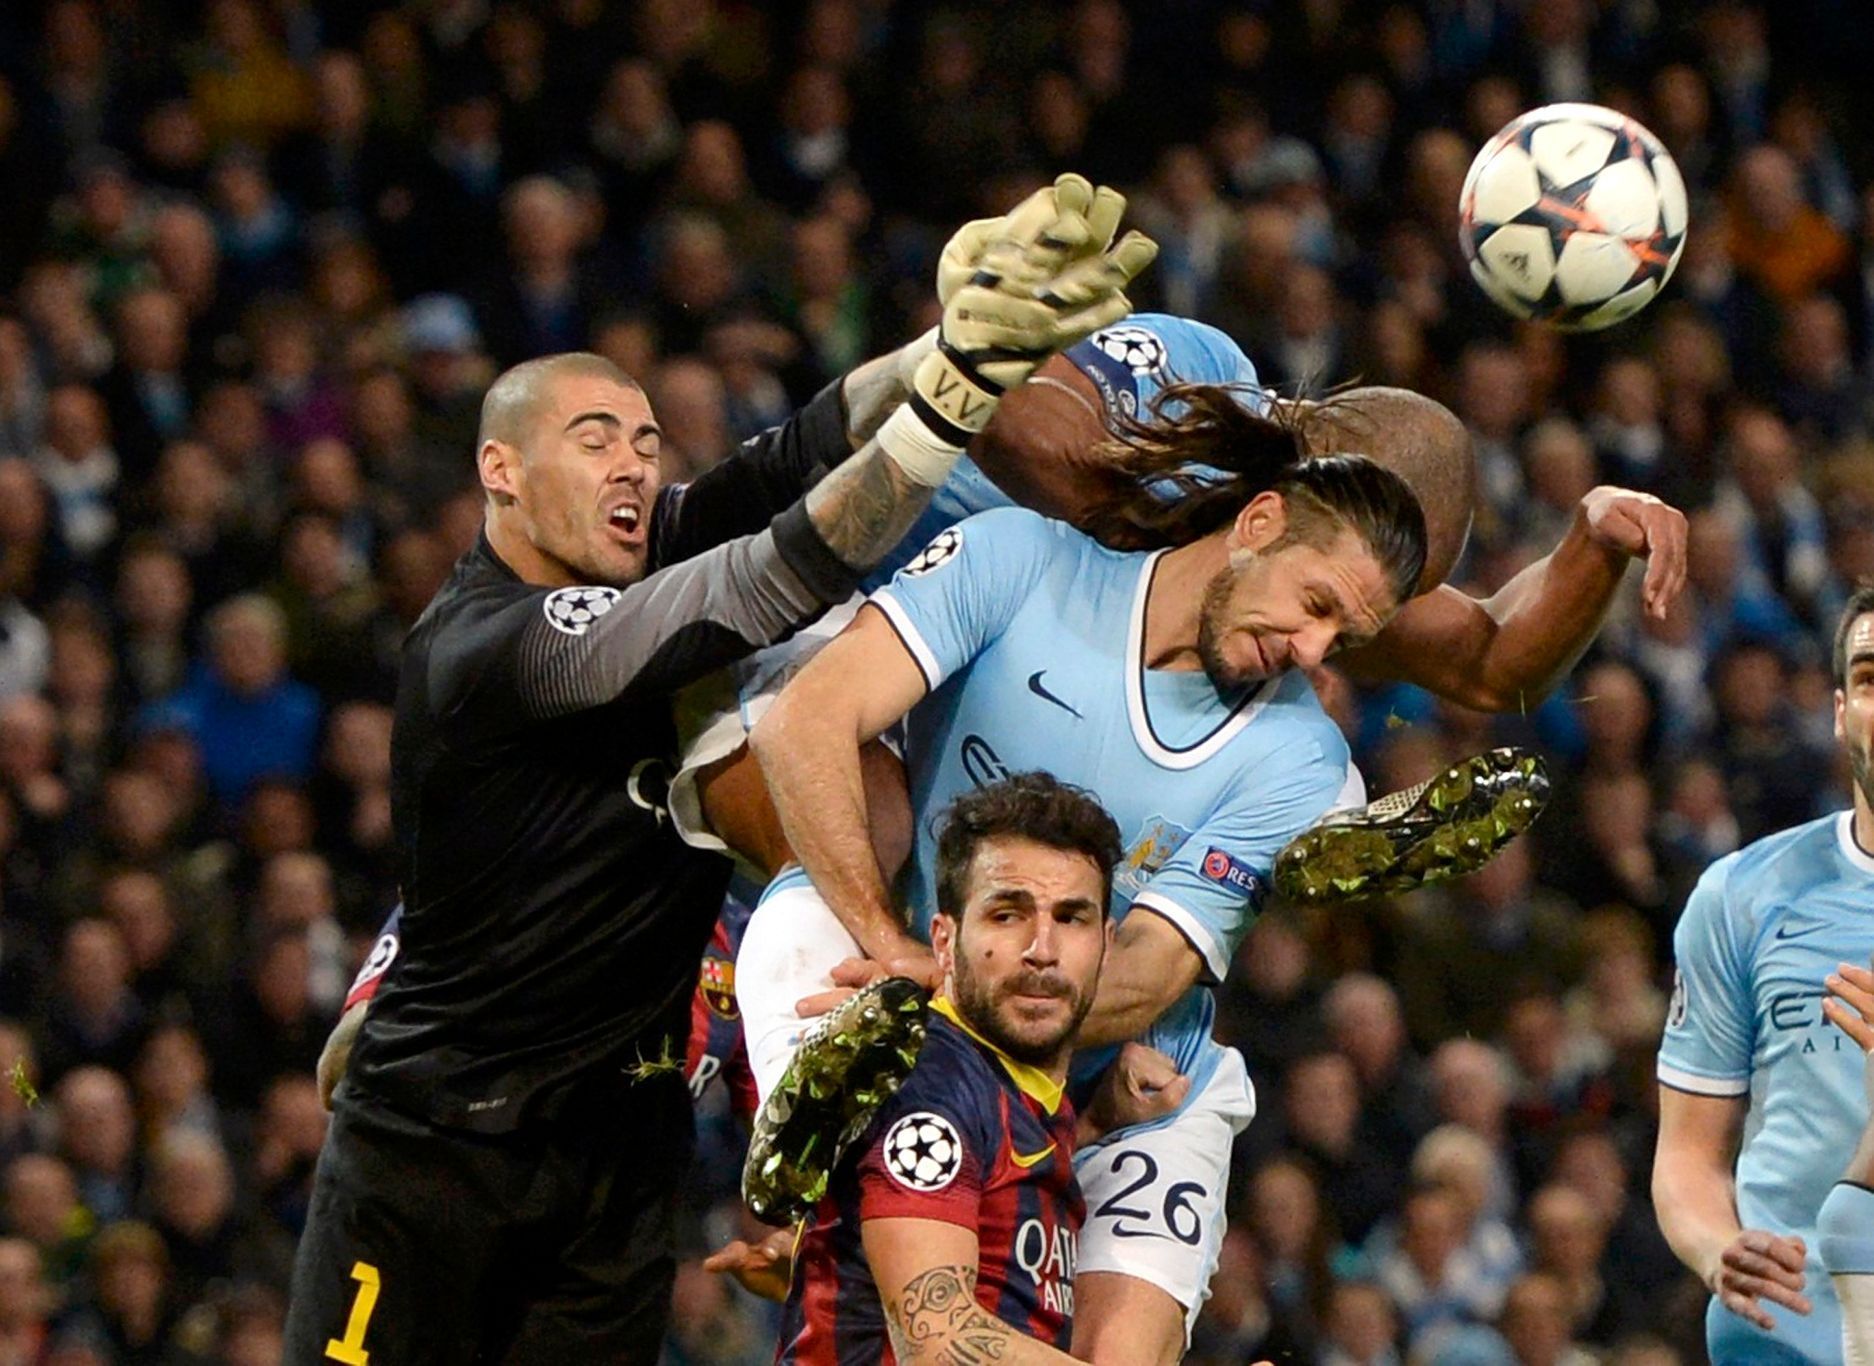 Barcelona's goalkeeper Valdes punches the ball past Barcelona's Fabregas and Manchester City's Kompany and Demichelis during their Champions League round of 16 first leg soccer match against Barcelona